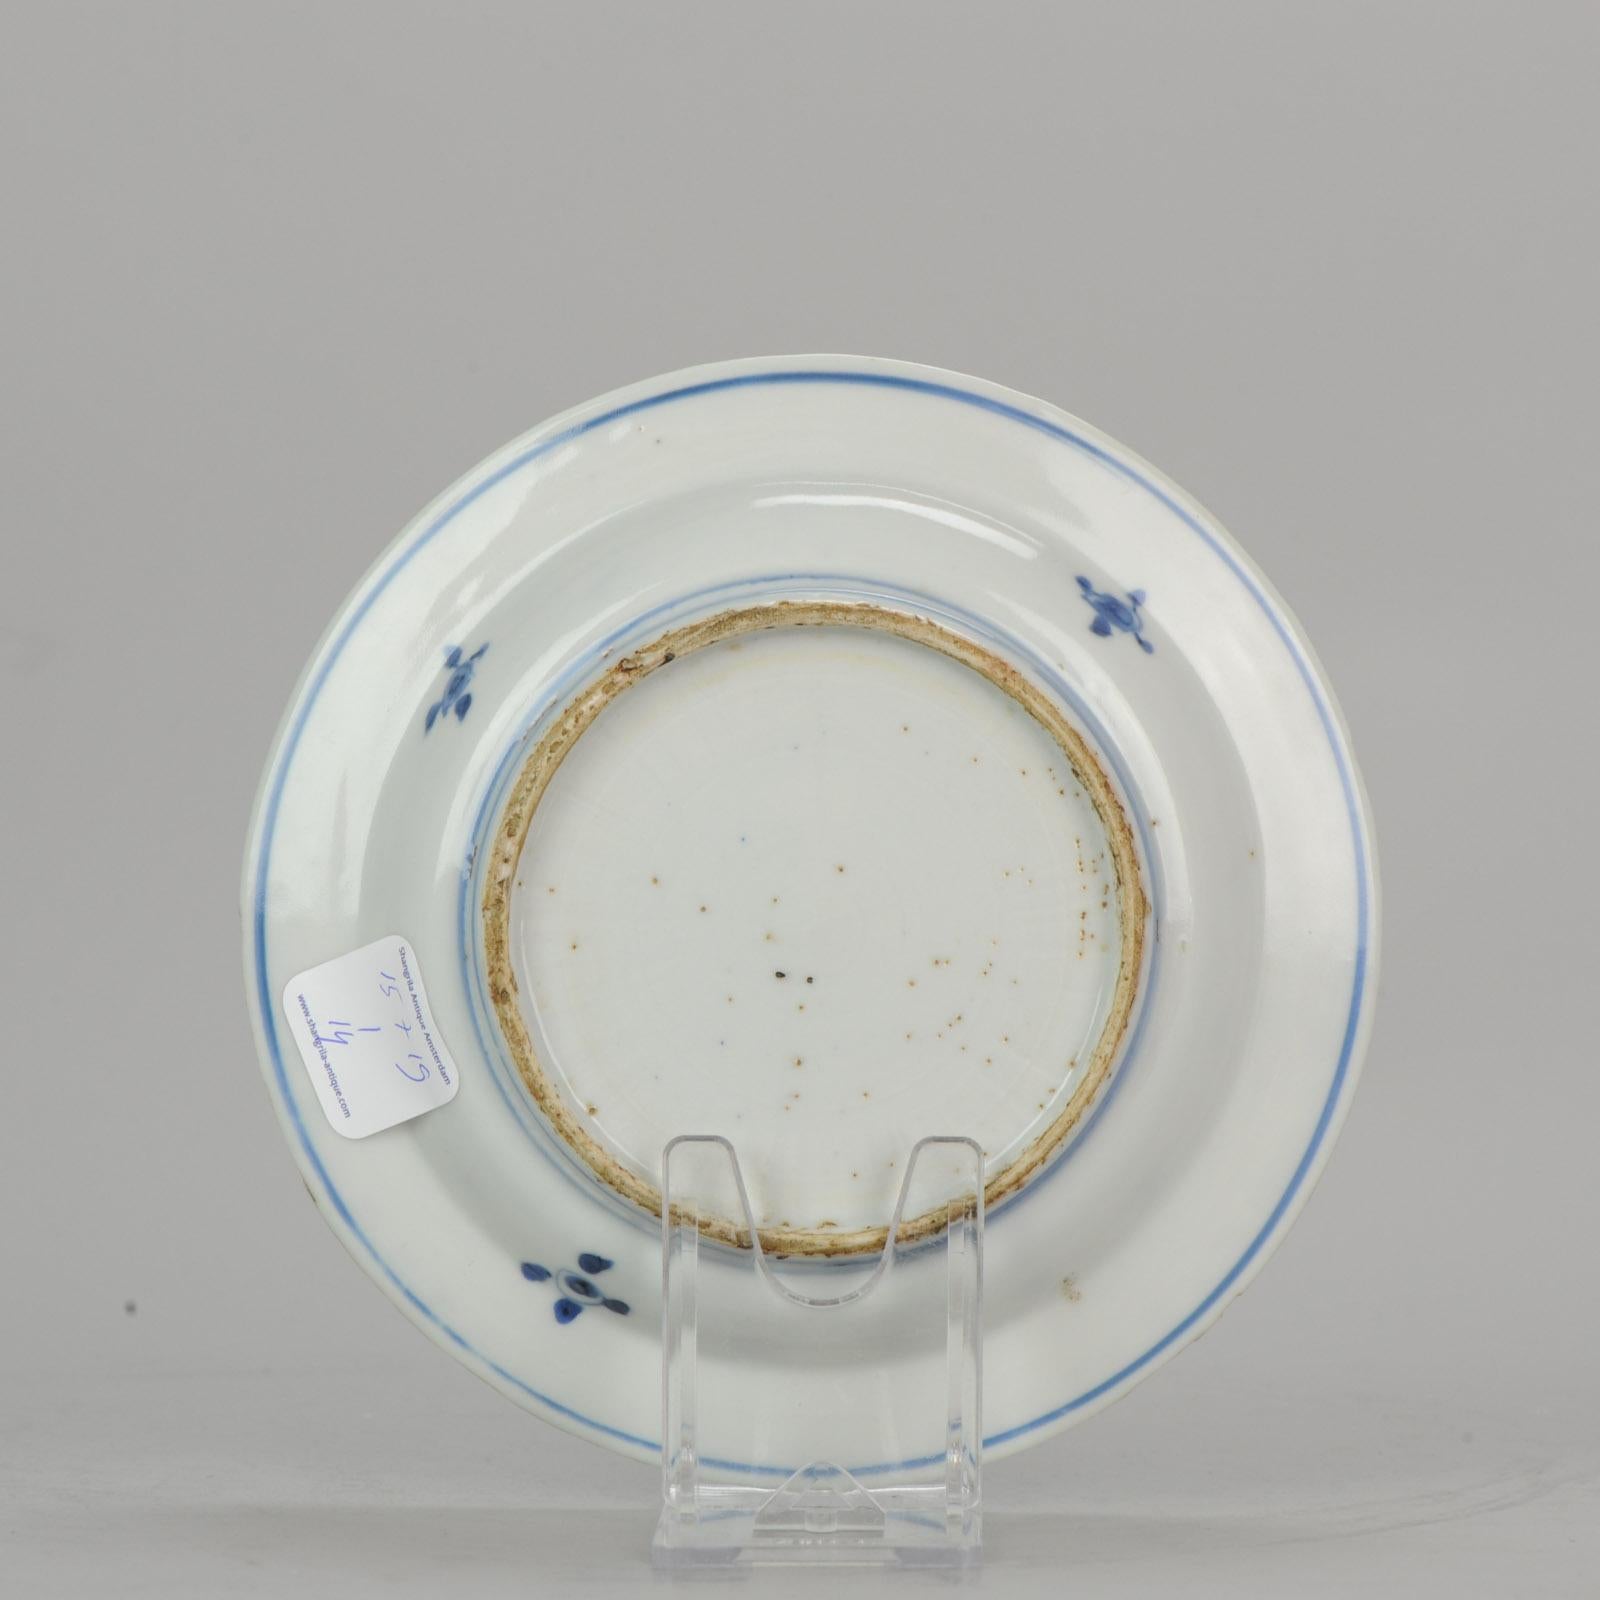 18th Century and Earlier Antique Chinese Porcelain Plate 17th century Ming Dynasty Tianqi/Chongzhen